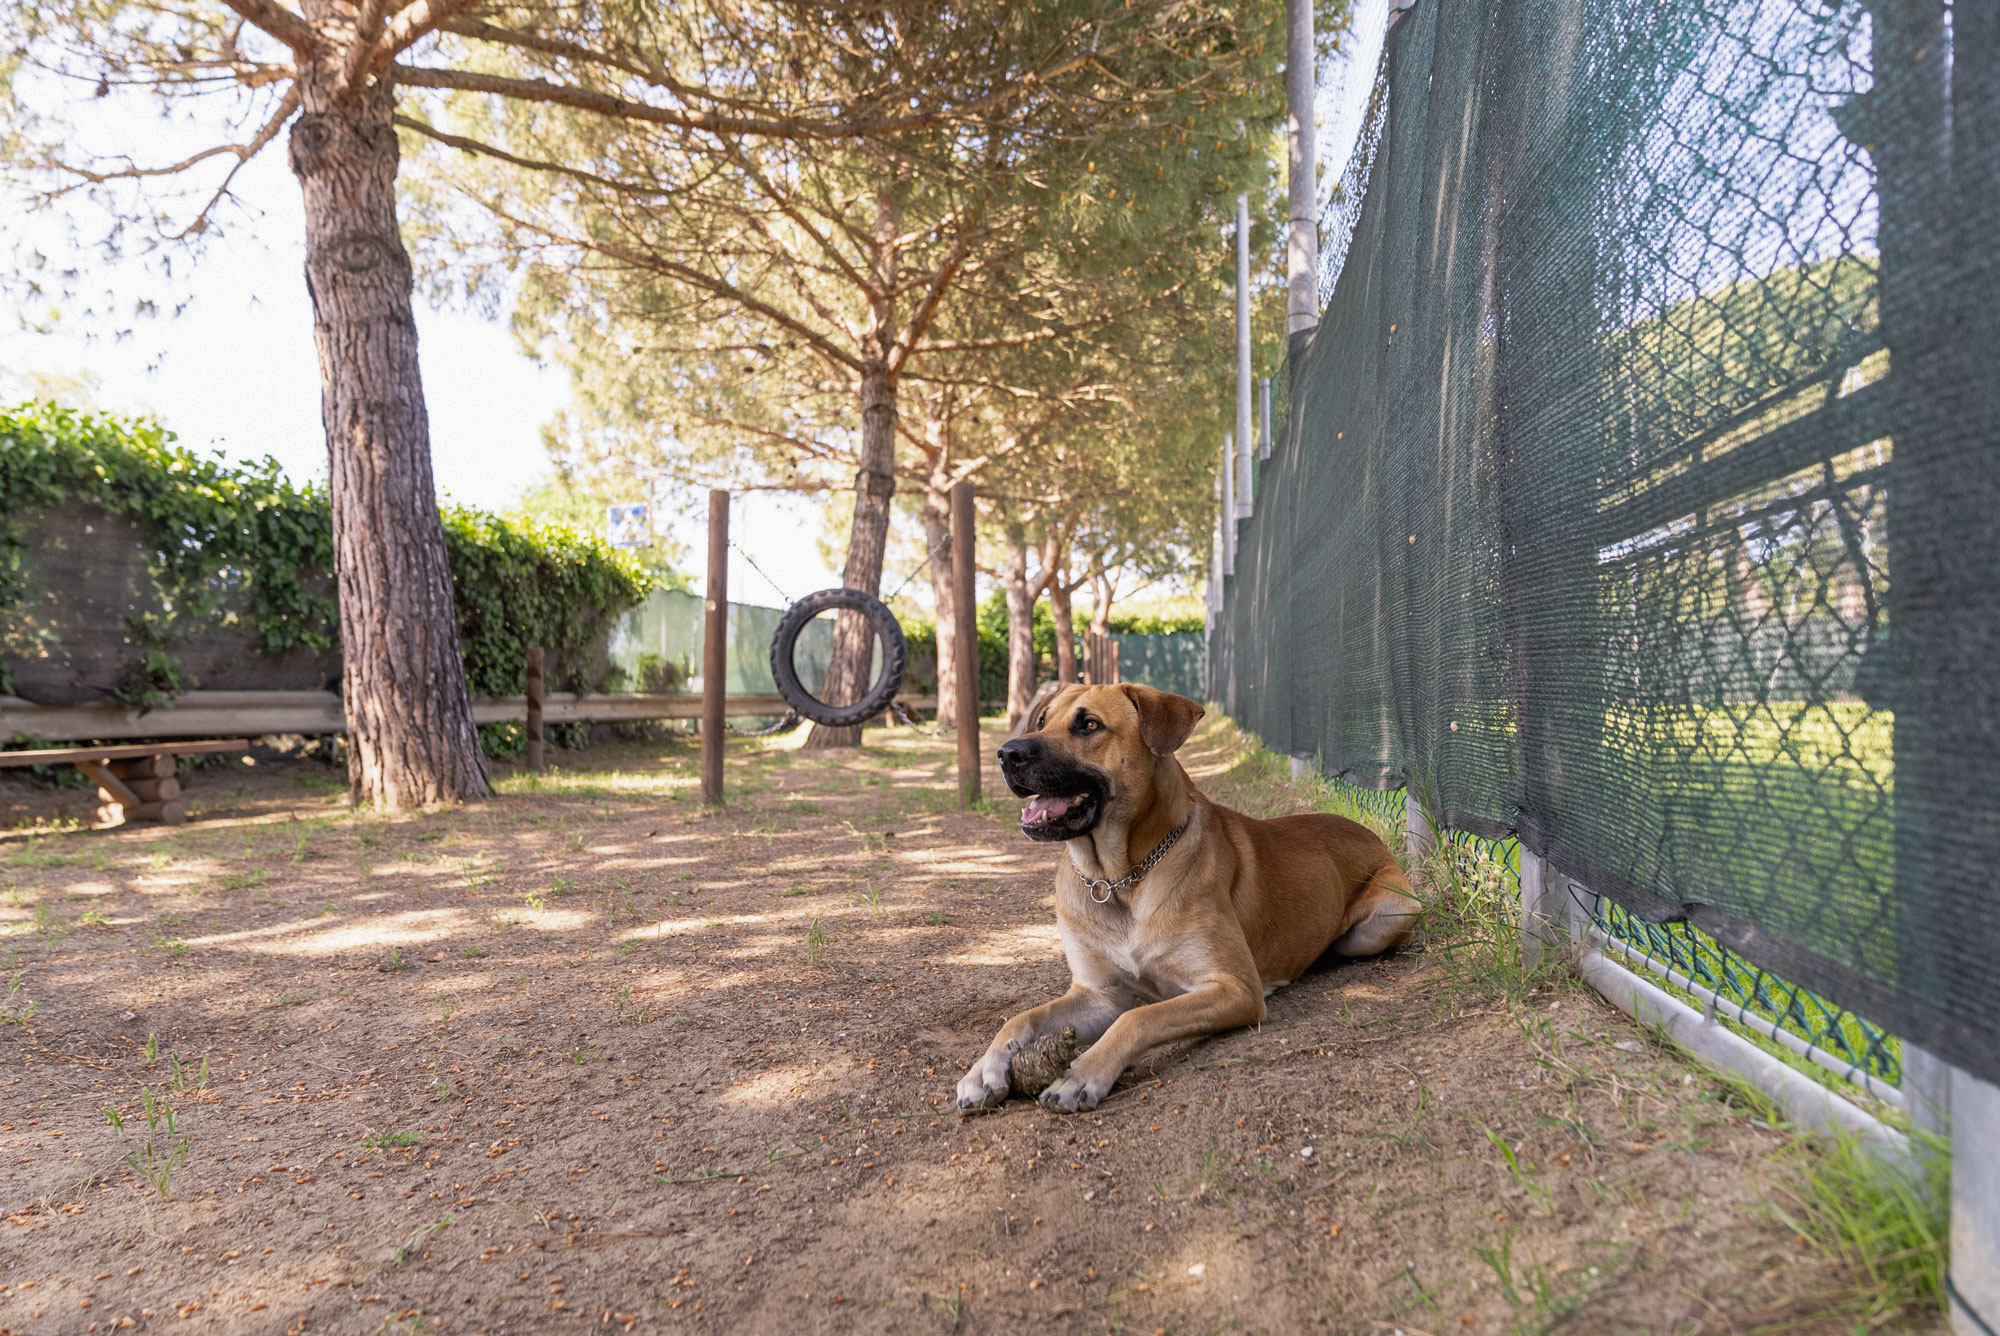 At the Marina Family Village you can enjoy “Dog Friendly” dolce vita, and that’s not all…